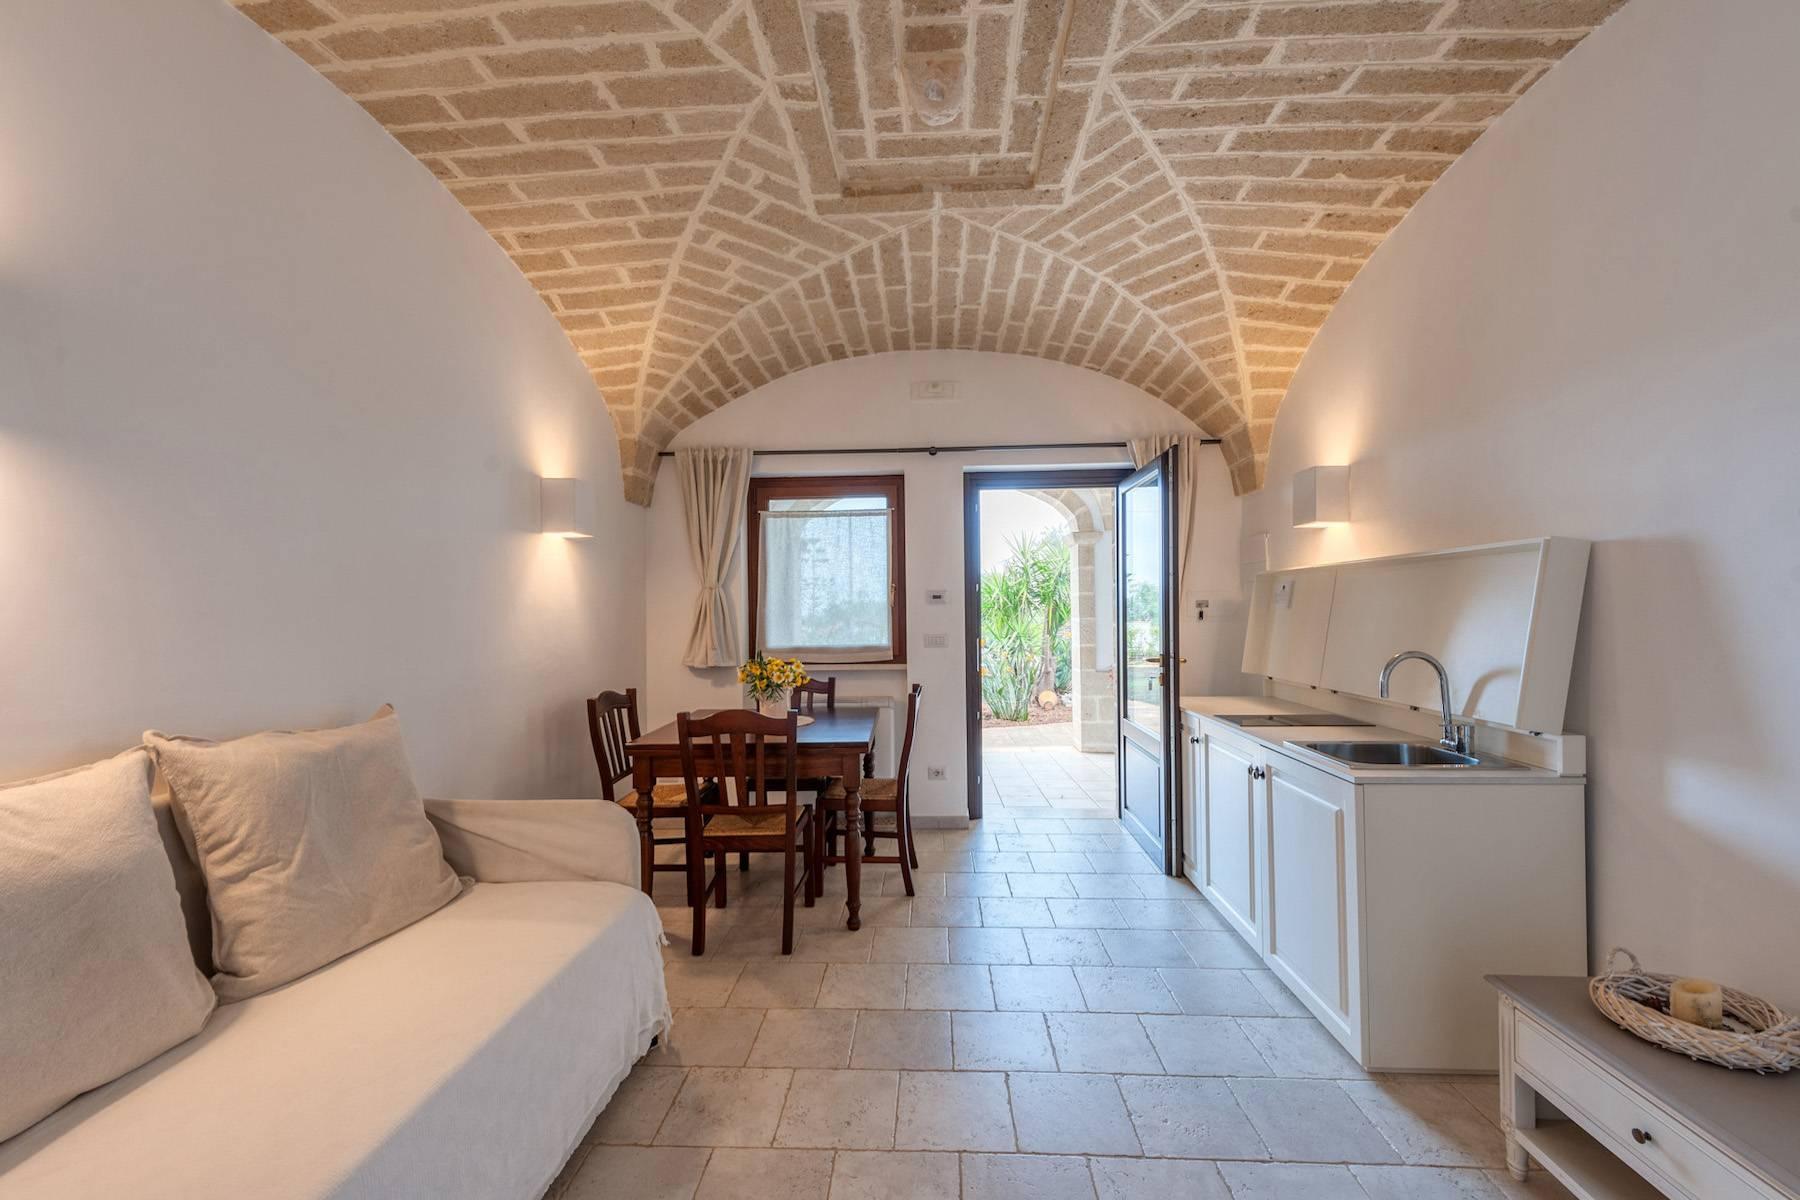 Charming 18th century Masseria surrounded by centuries-old olive trees - 20